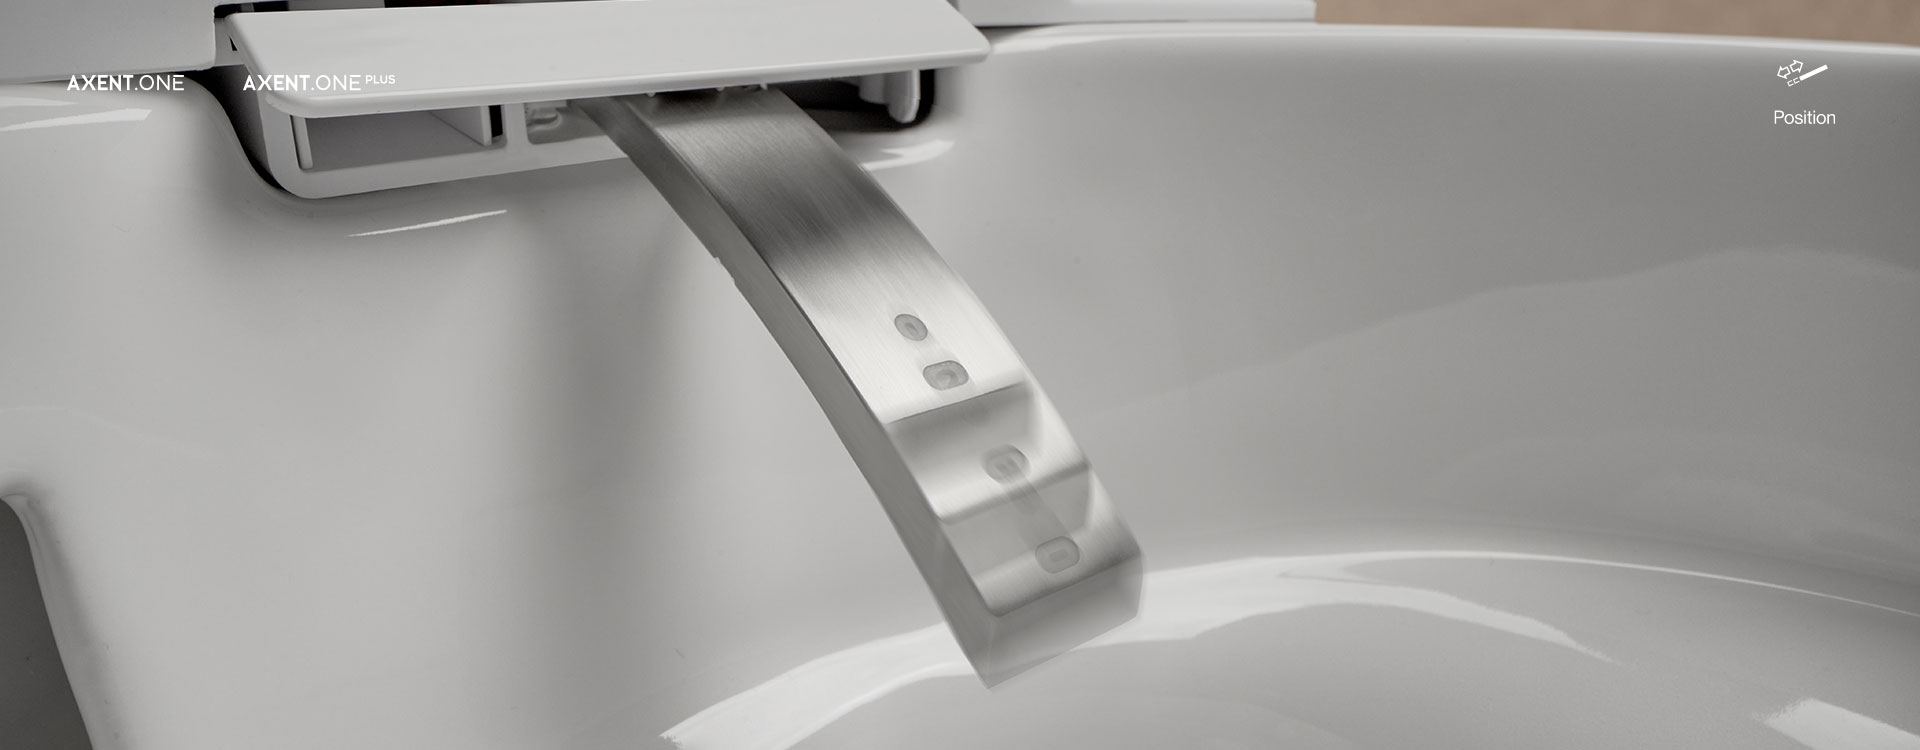 AXENT.ONE Shower toilet | Features